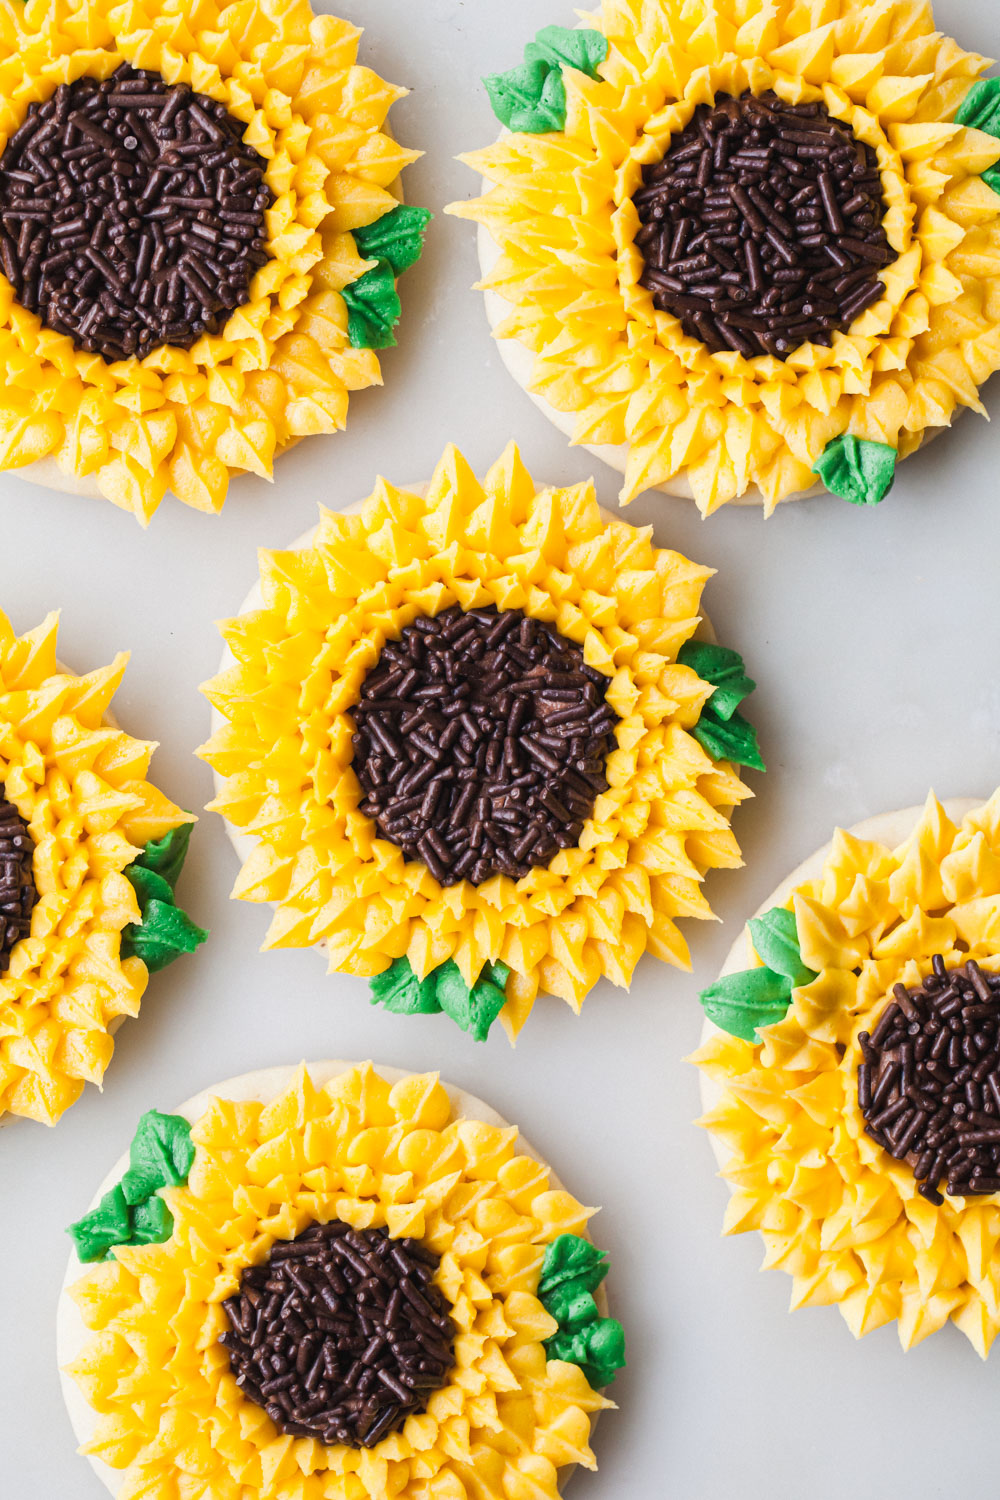 How to Decorate Sunflower Cookies